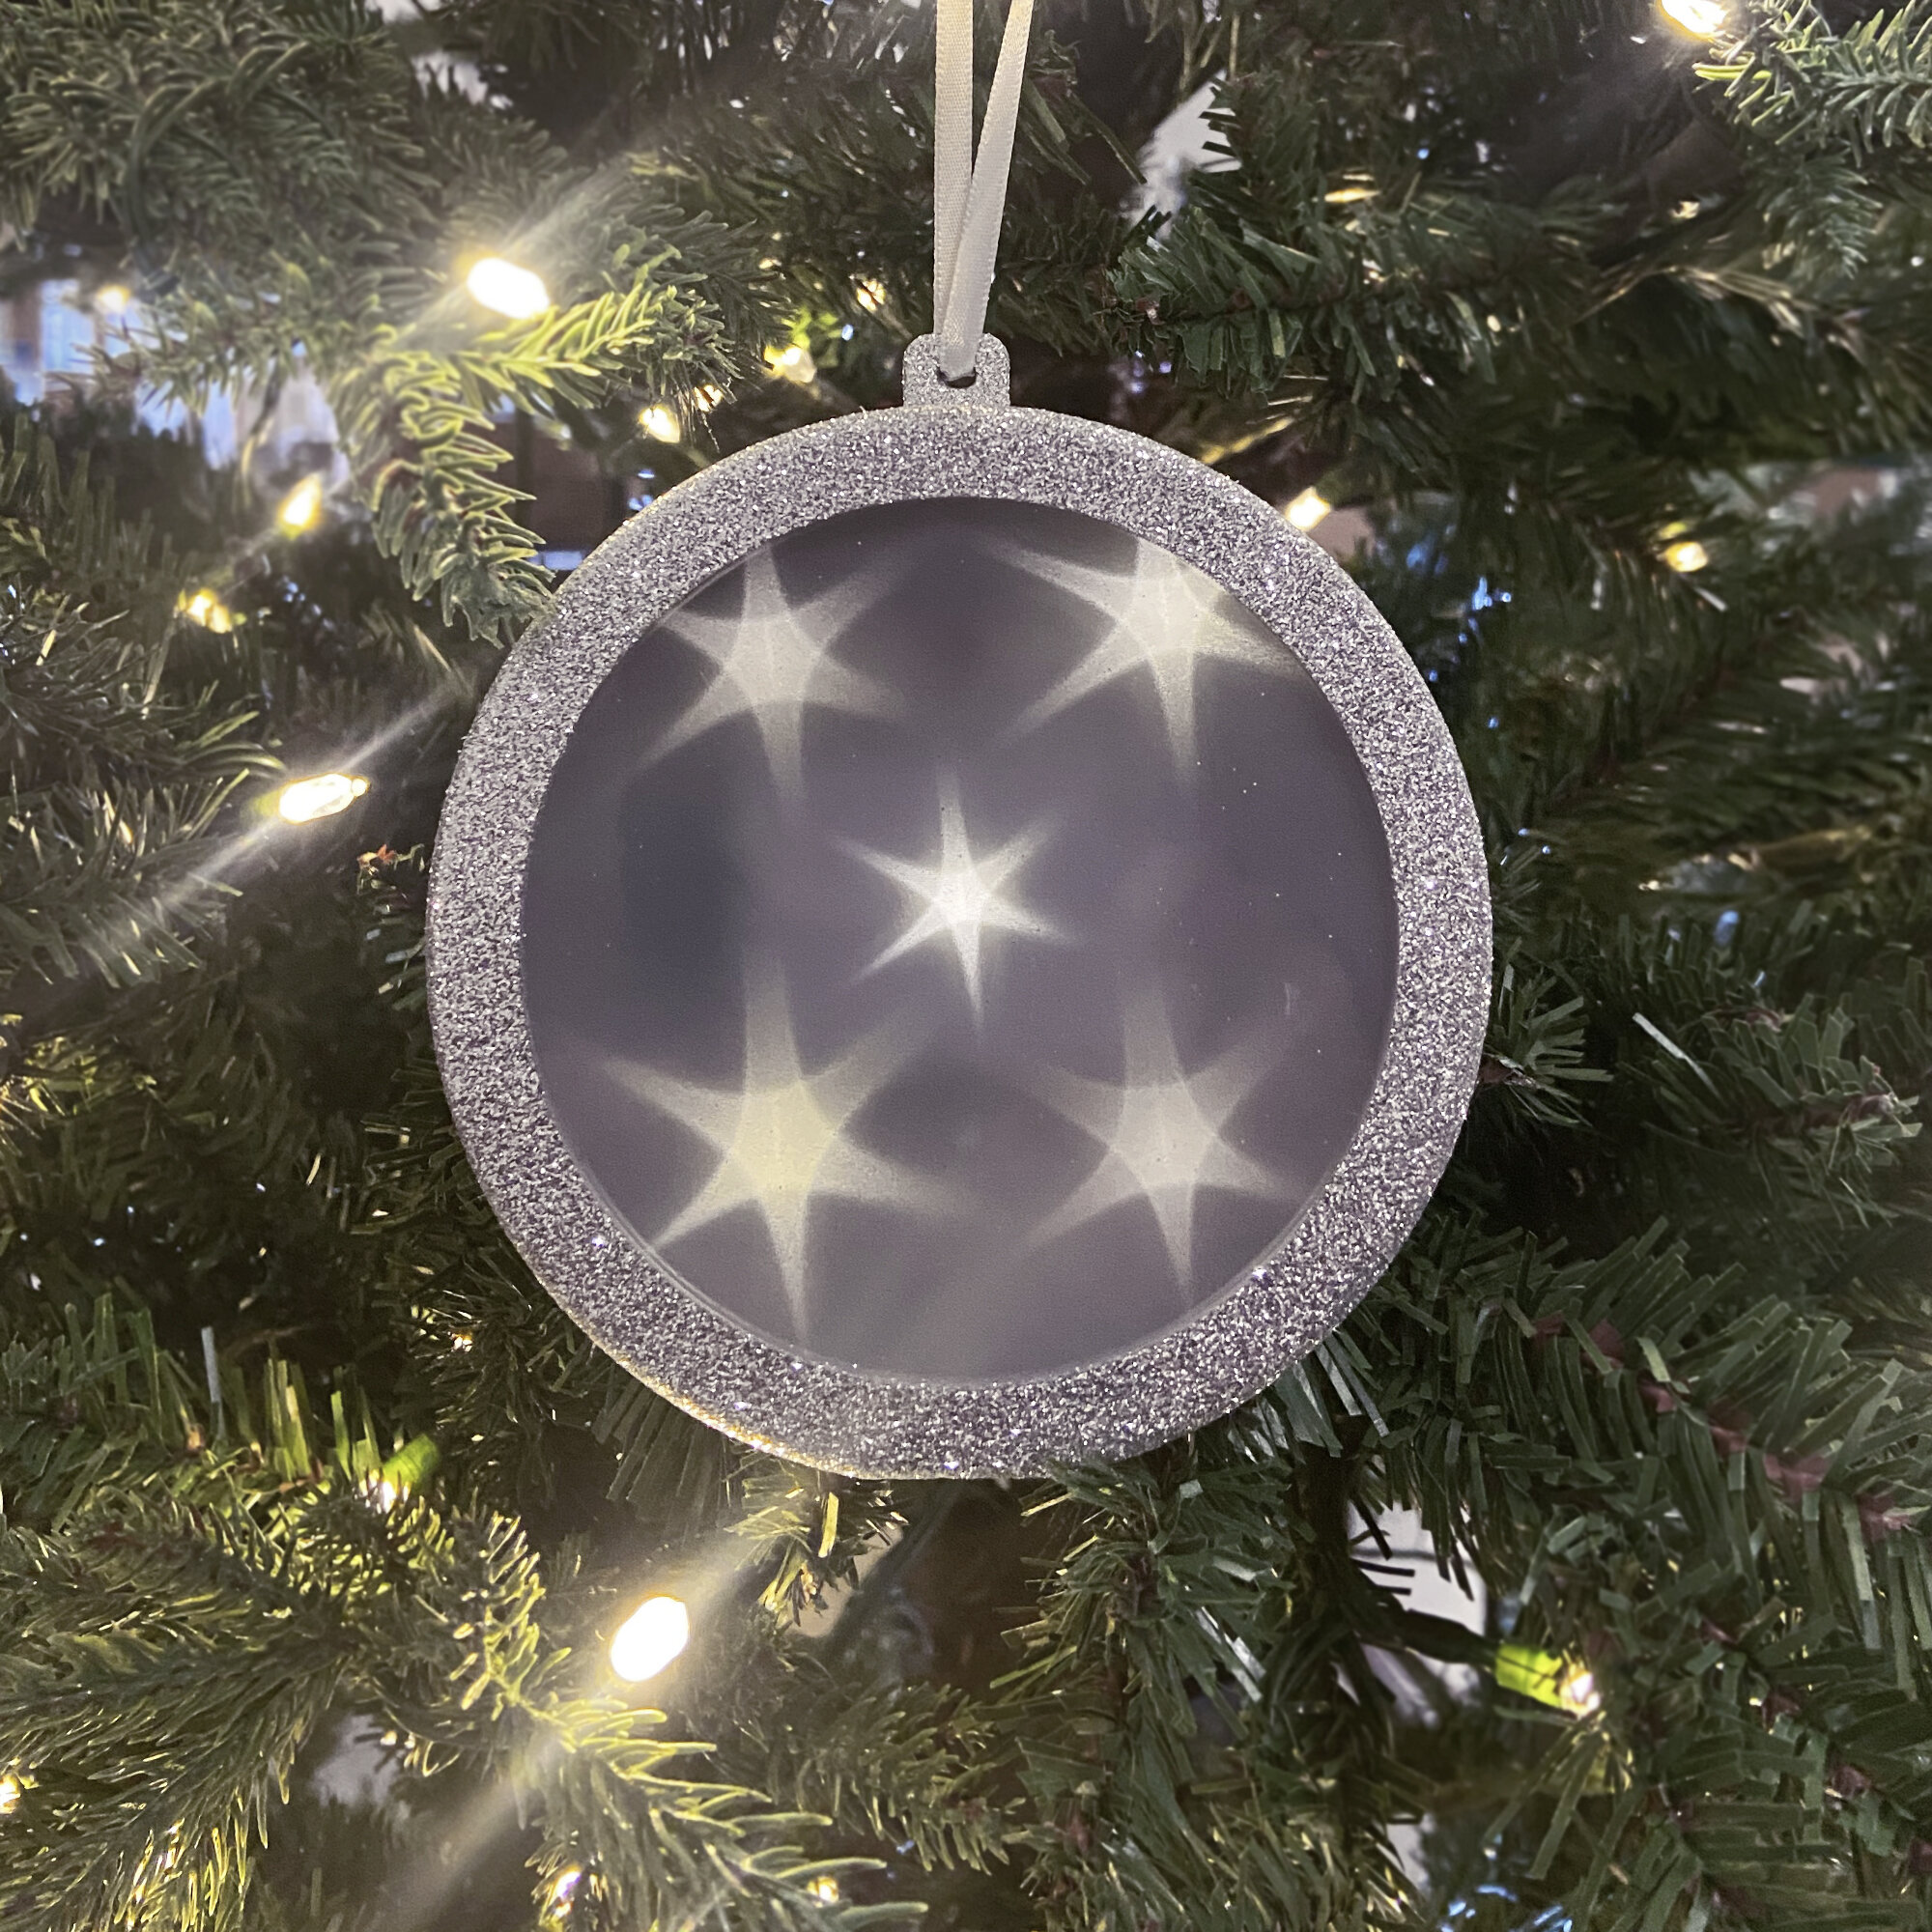 Iridescent Twinkle Little Star Moon Garland Holographic Hanging